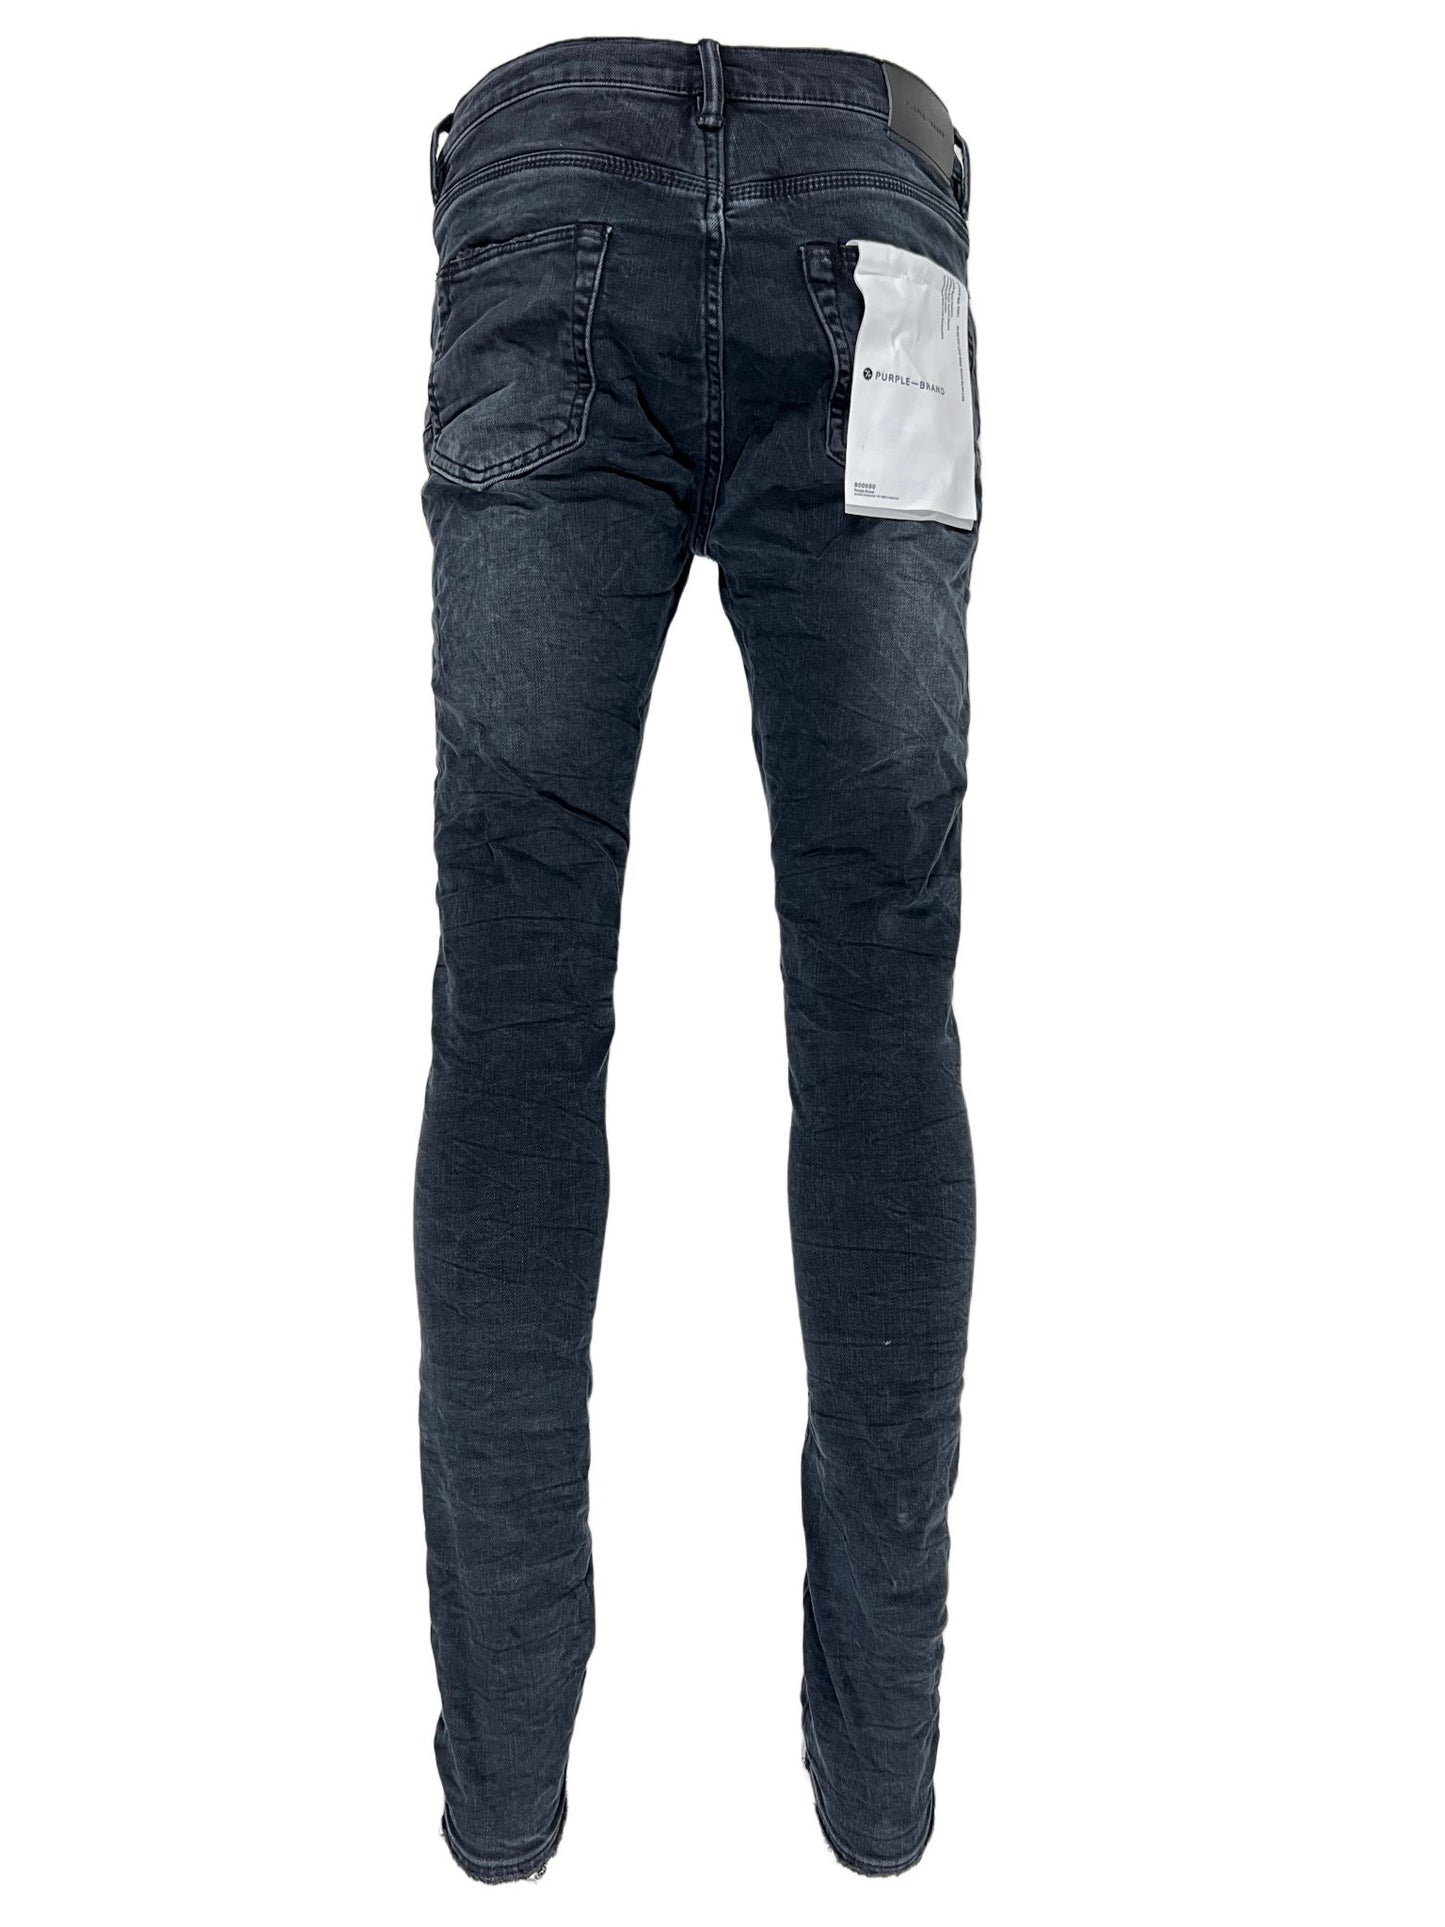 Purple Brand Jeans American High Street Black Distressed And Worn Outovvd  From Rollsroyces, $34.54